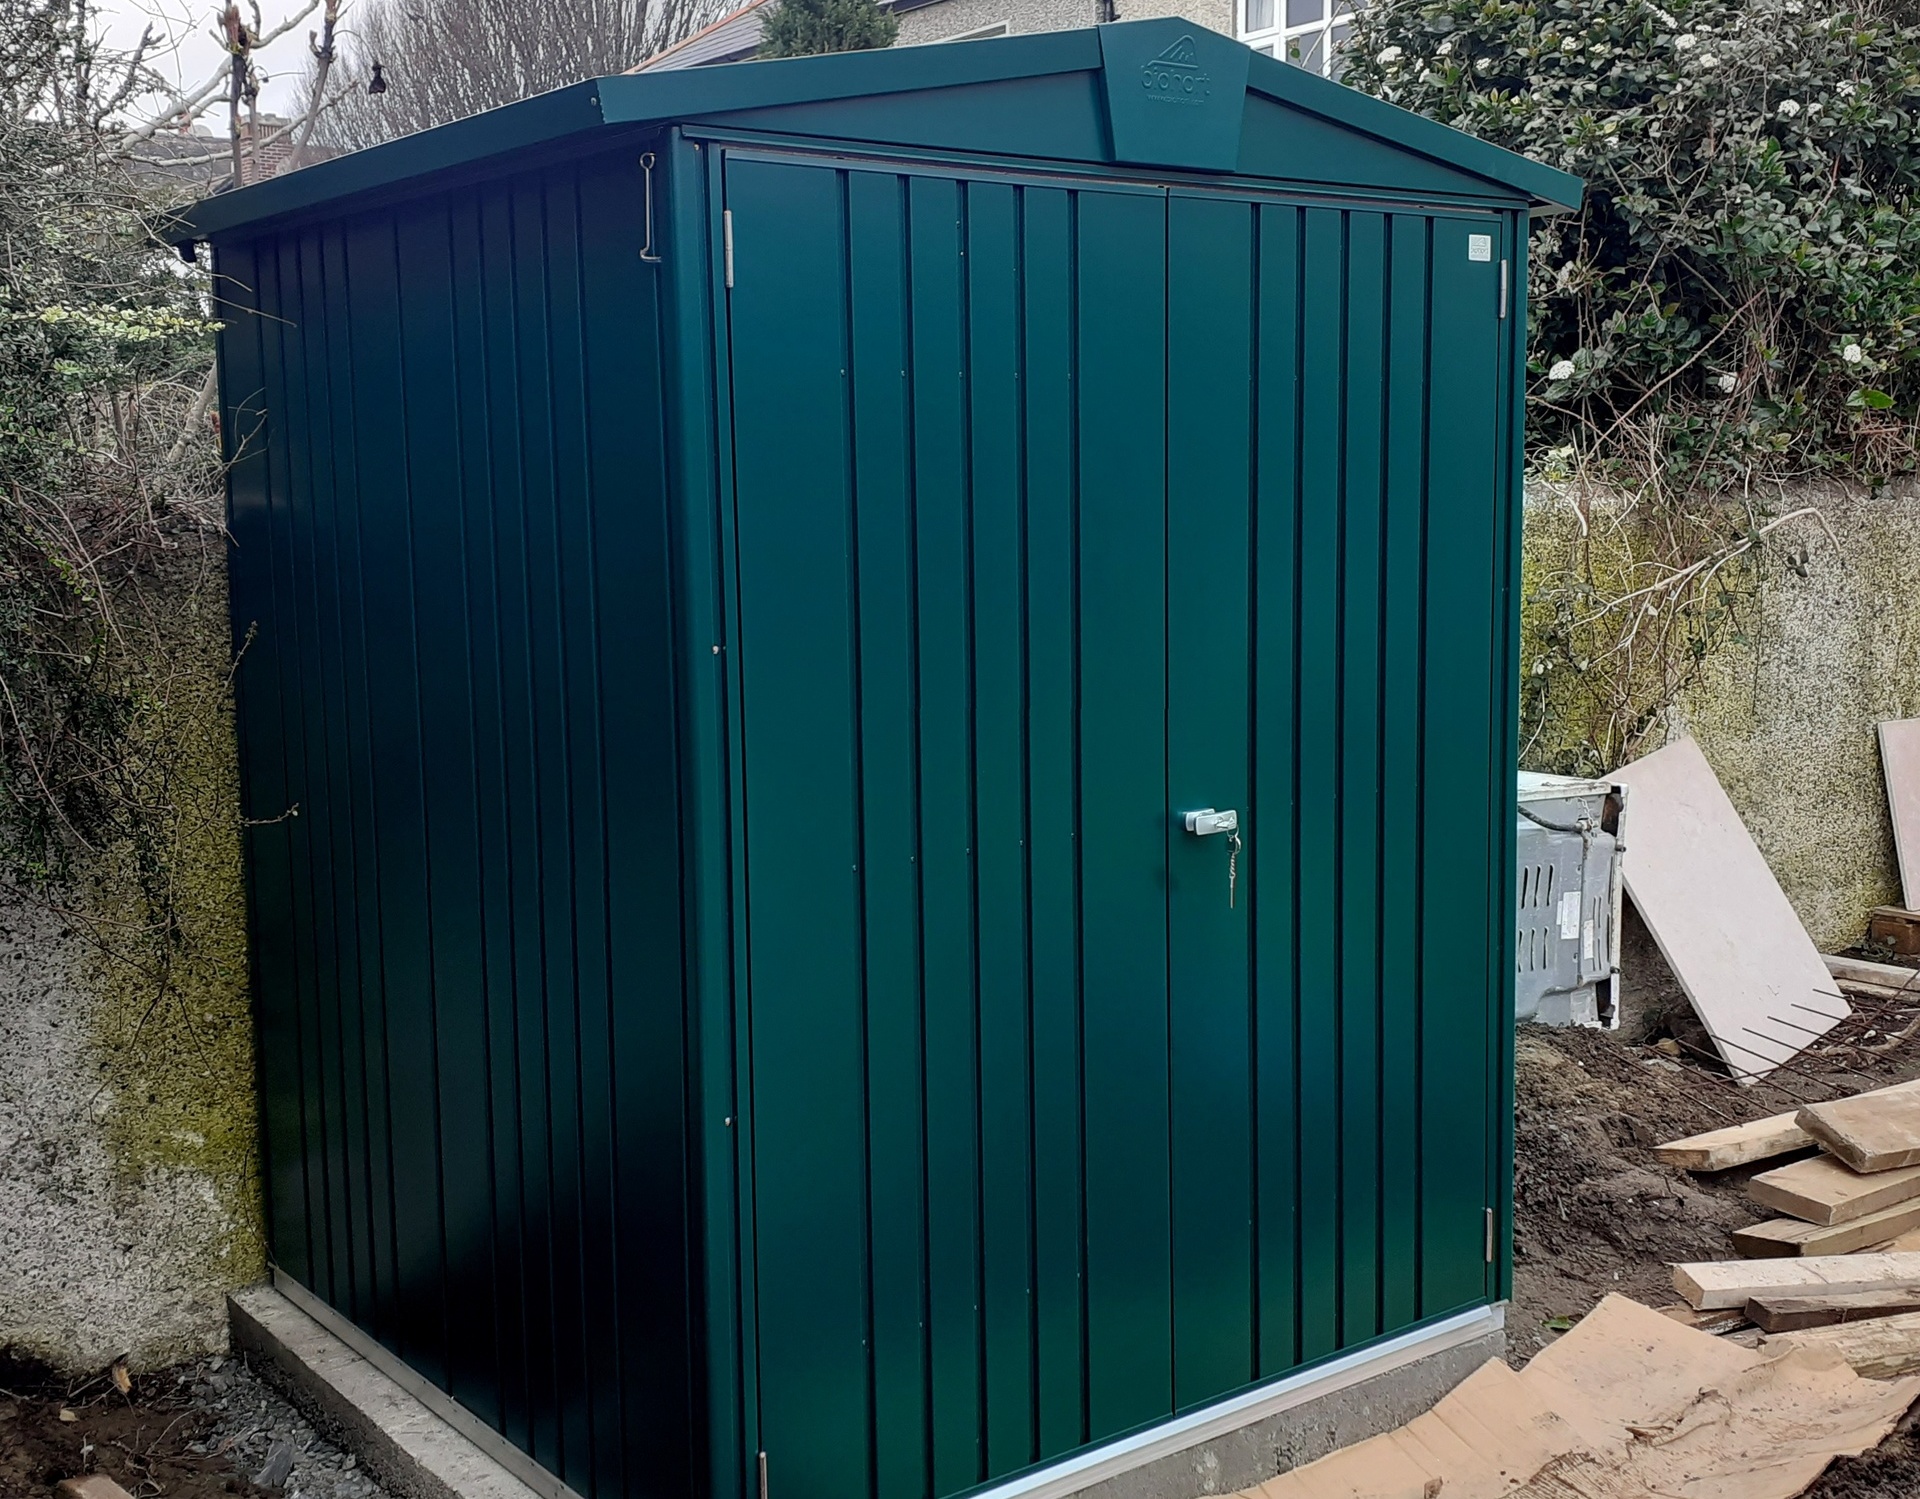 Biohort Europa 2 Garden Shed - exceptional value for a quality steel garden shed, blending functionality, durability and classic design  |  Supplied + Fitted in Ranelagh, Dublin 6 by Owen Chubb Landscapers - Ireland's premier Biohort Supplier & Installer.